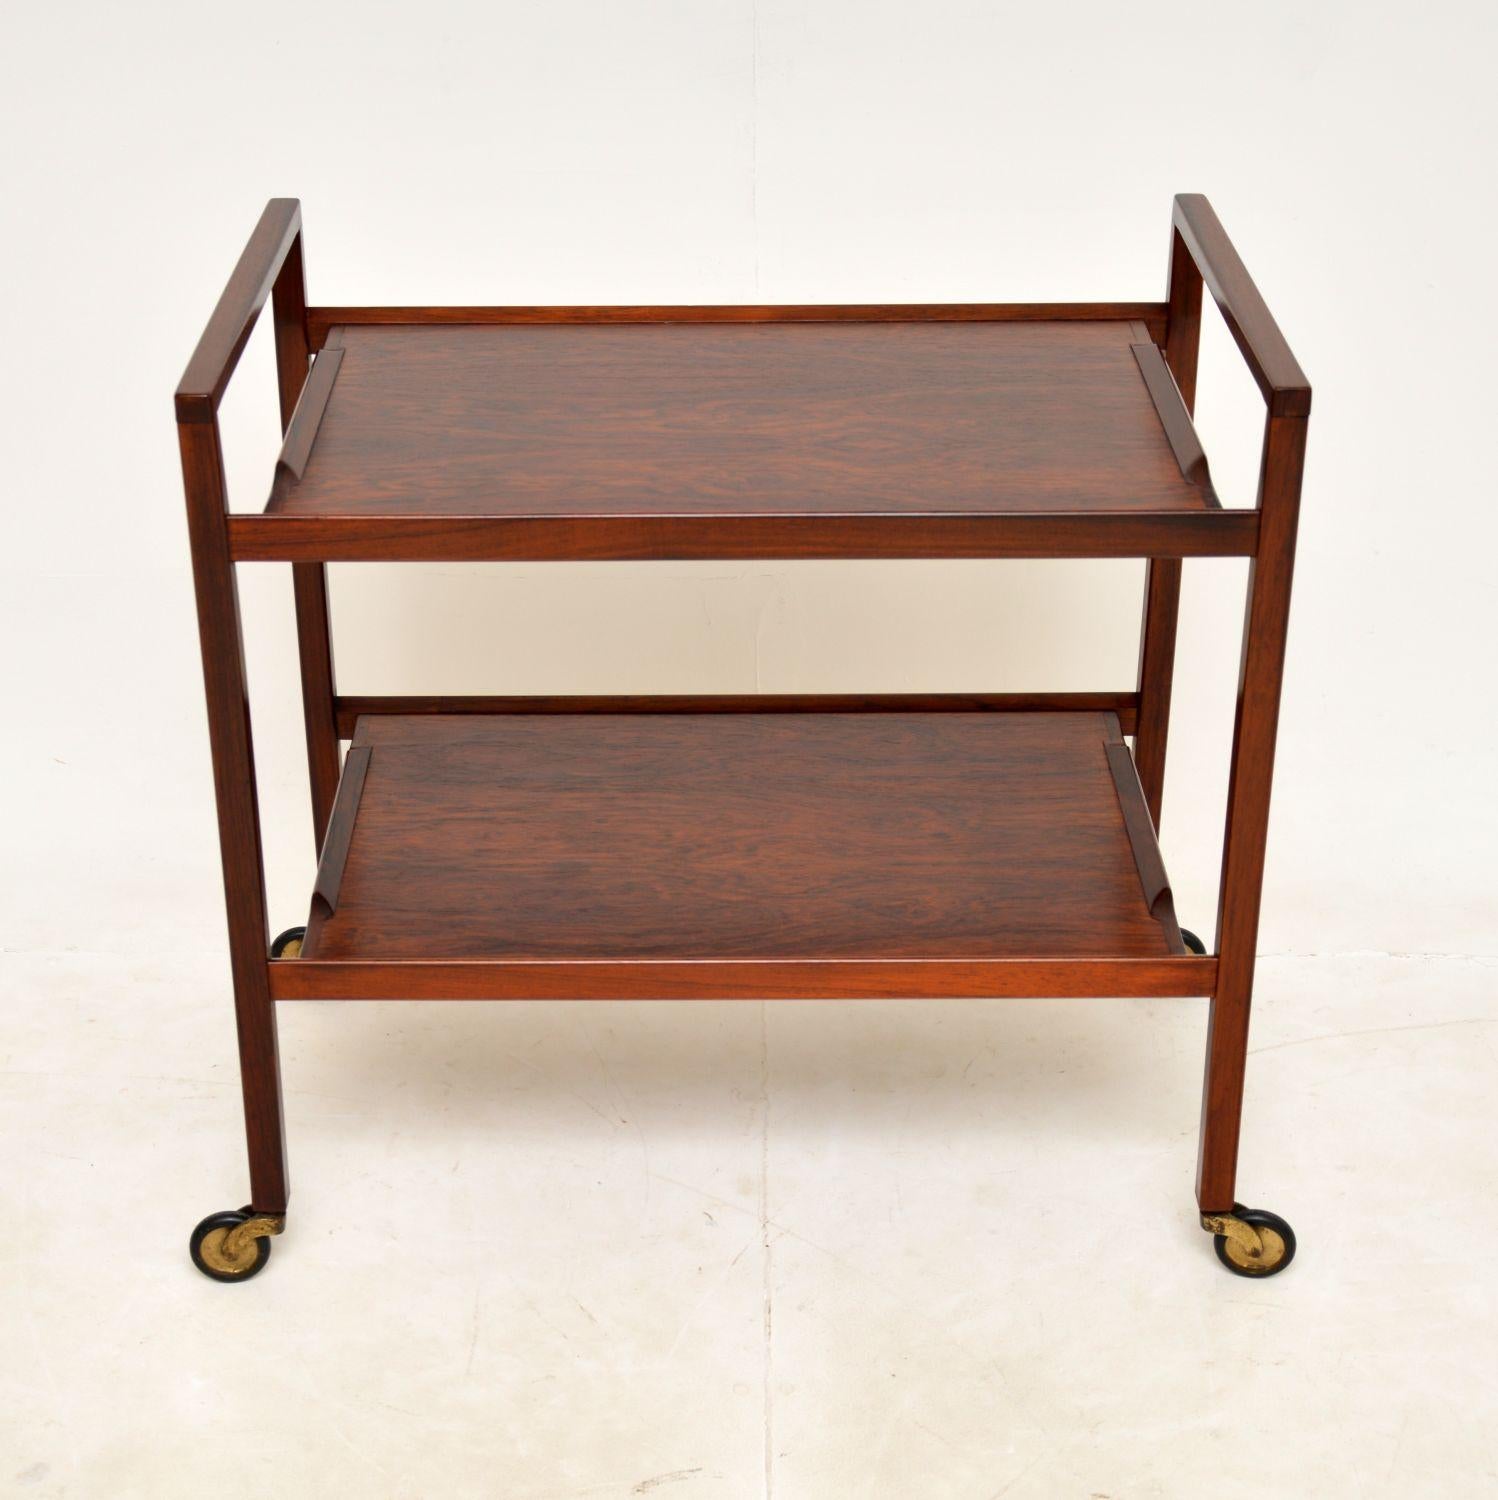 A stylish and extremely well made Danish vintage drinks trolley, dating from the 1960s.

It has a fantastic lines, with beautifully moulded edges, this was likely designed by Kurt Ostervig. The quality is superb, it is nicely finished on all sides